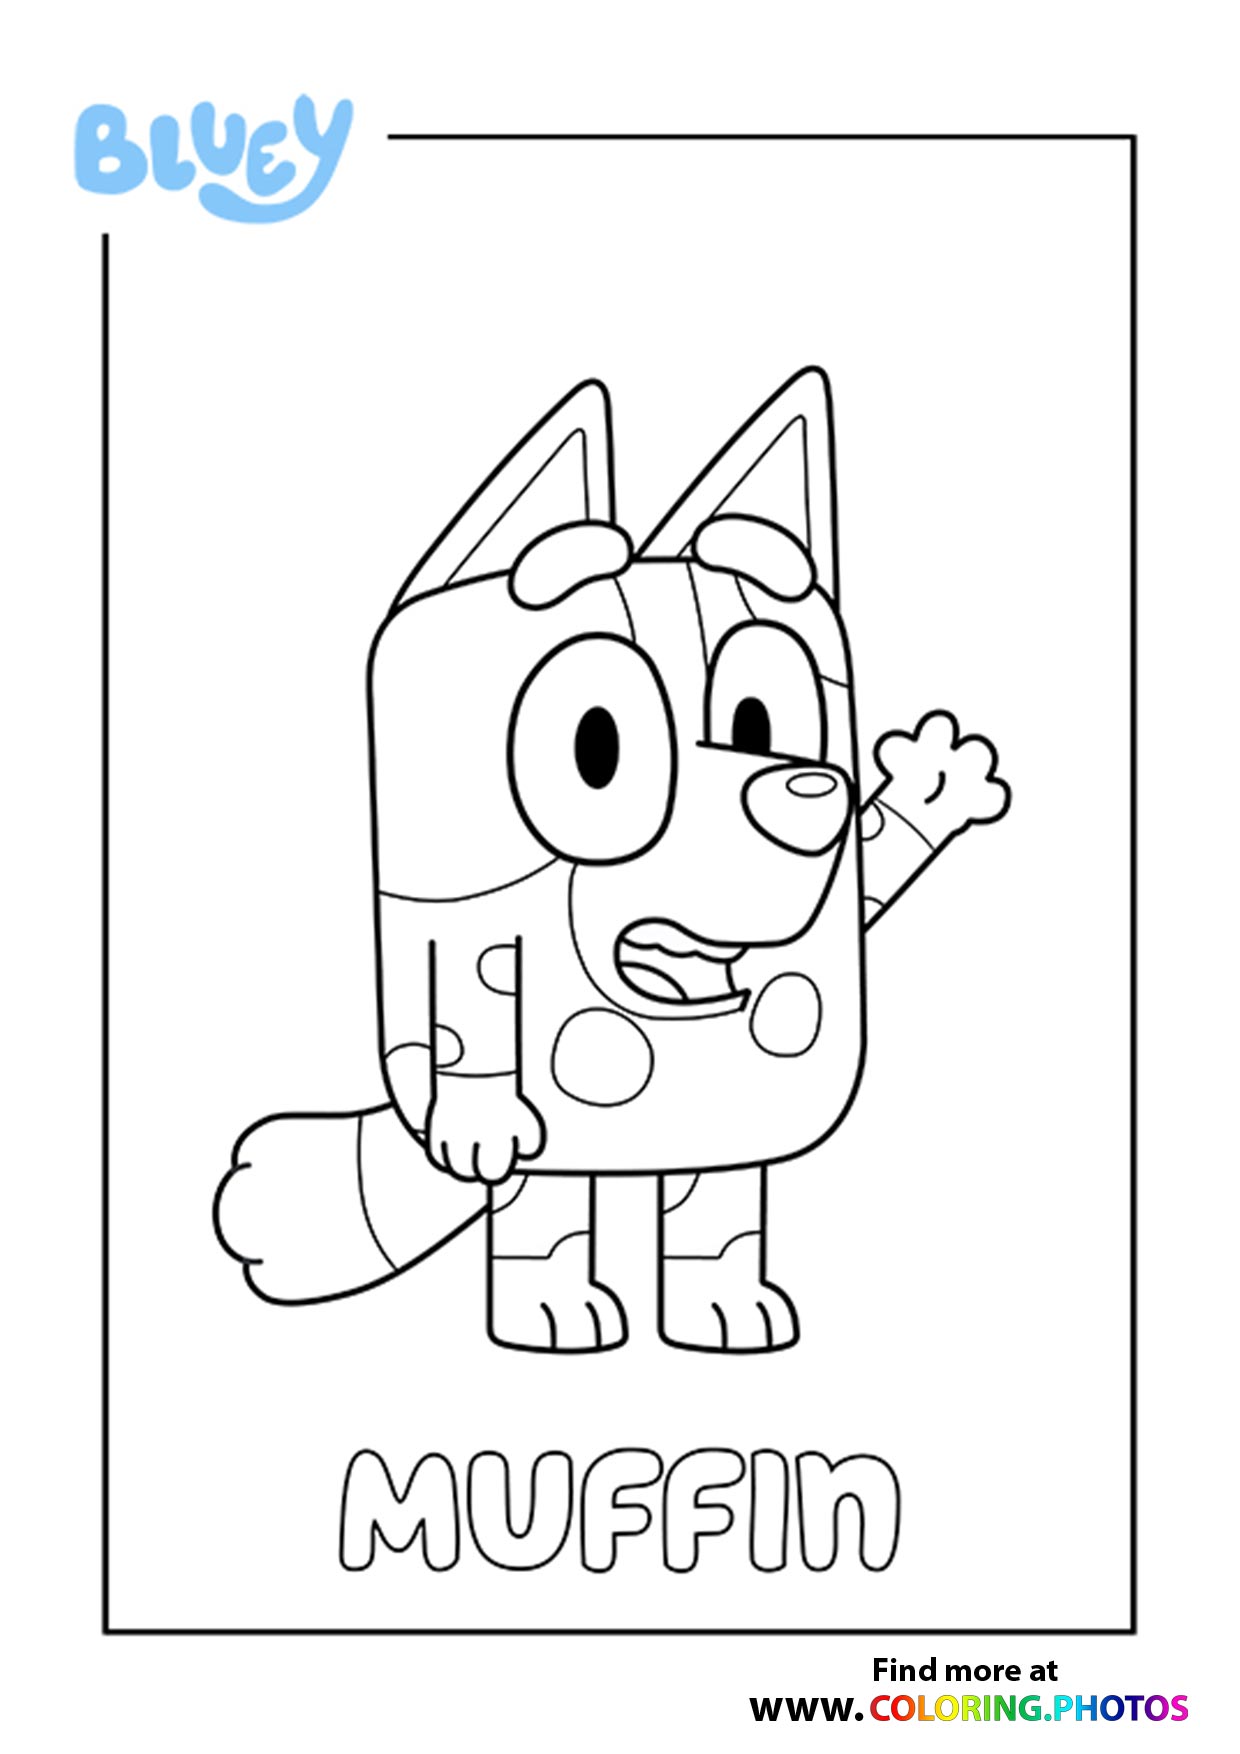 Bluey Muffin   Coloring Pages for kids